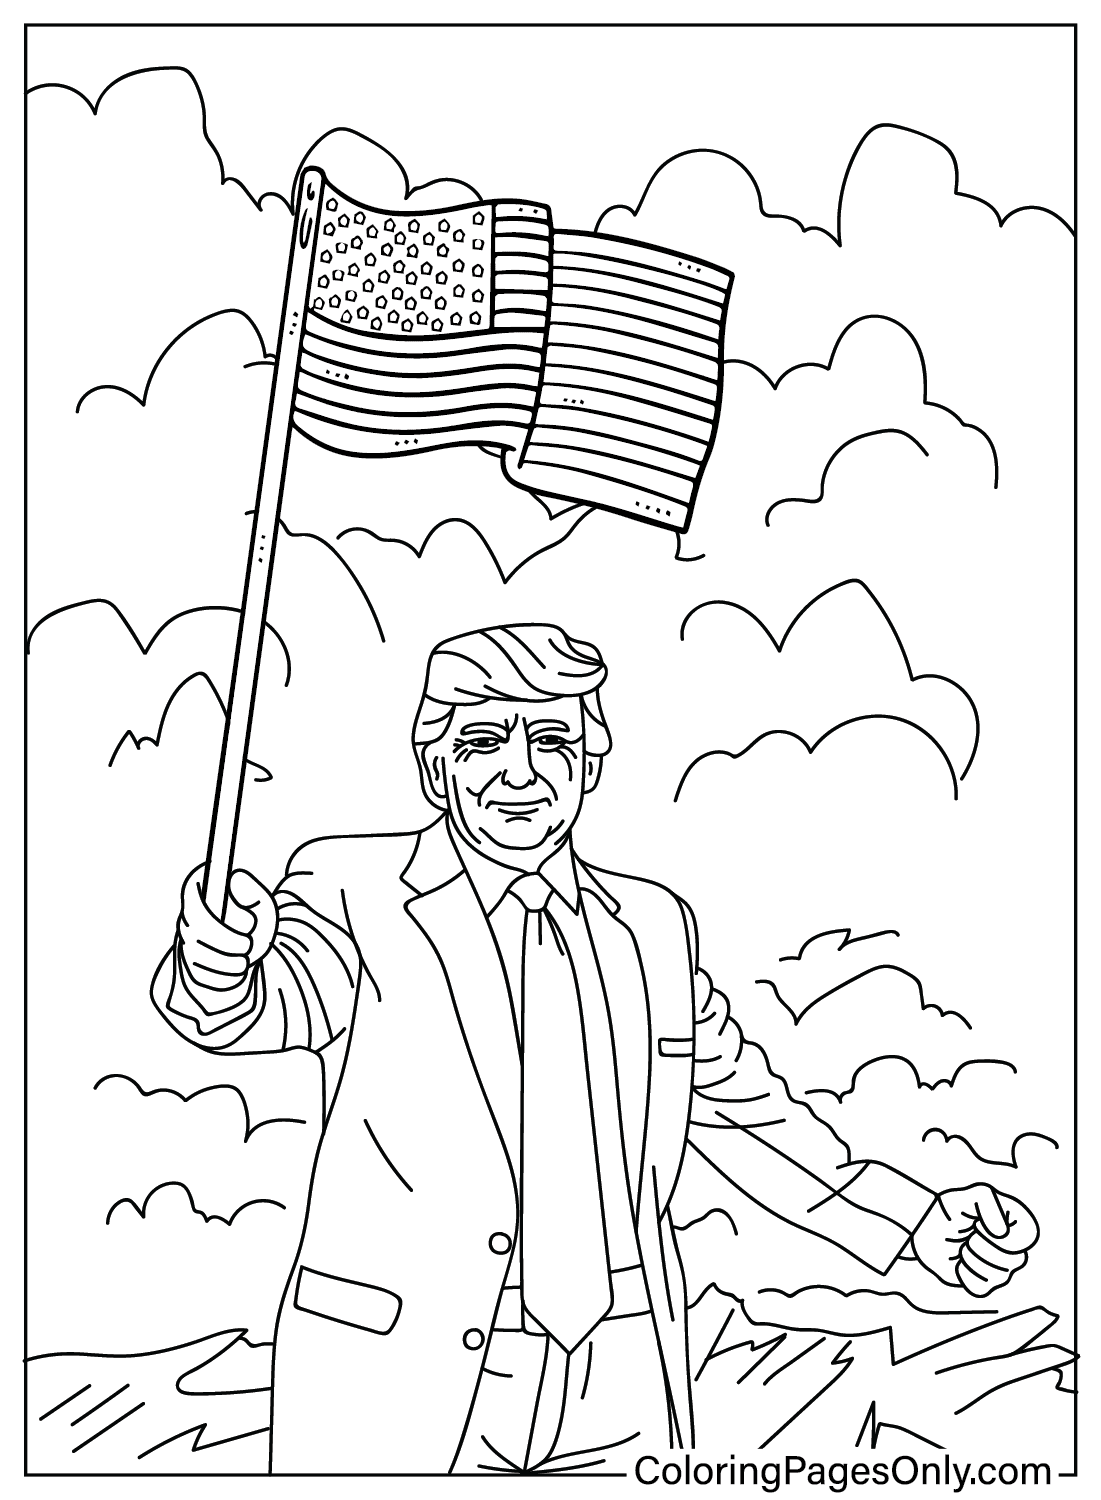 Donald Trump Adults Coloring Page from Donald Trump